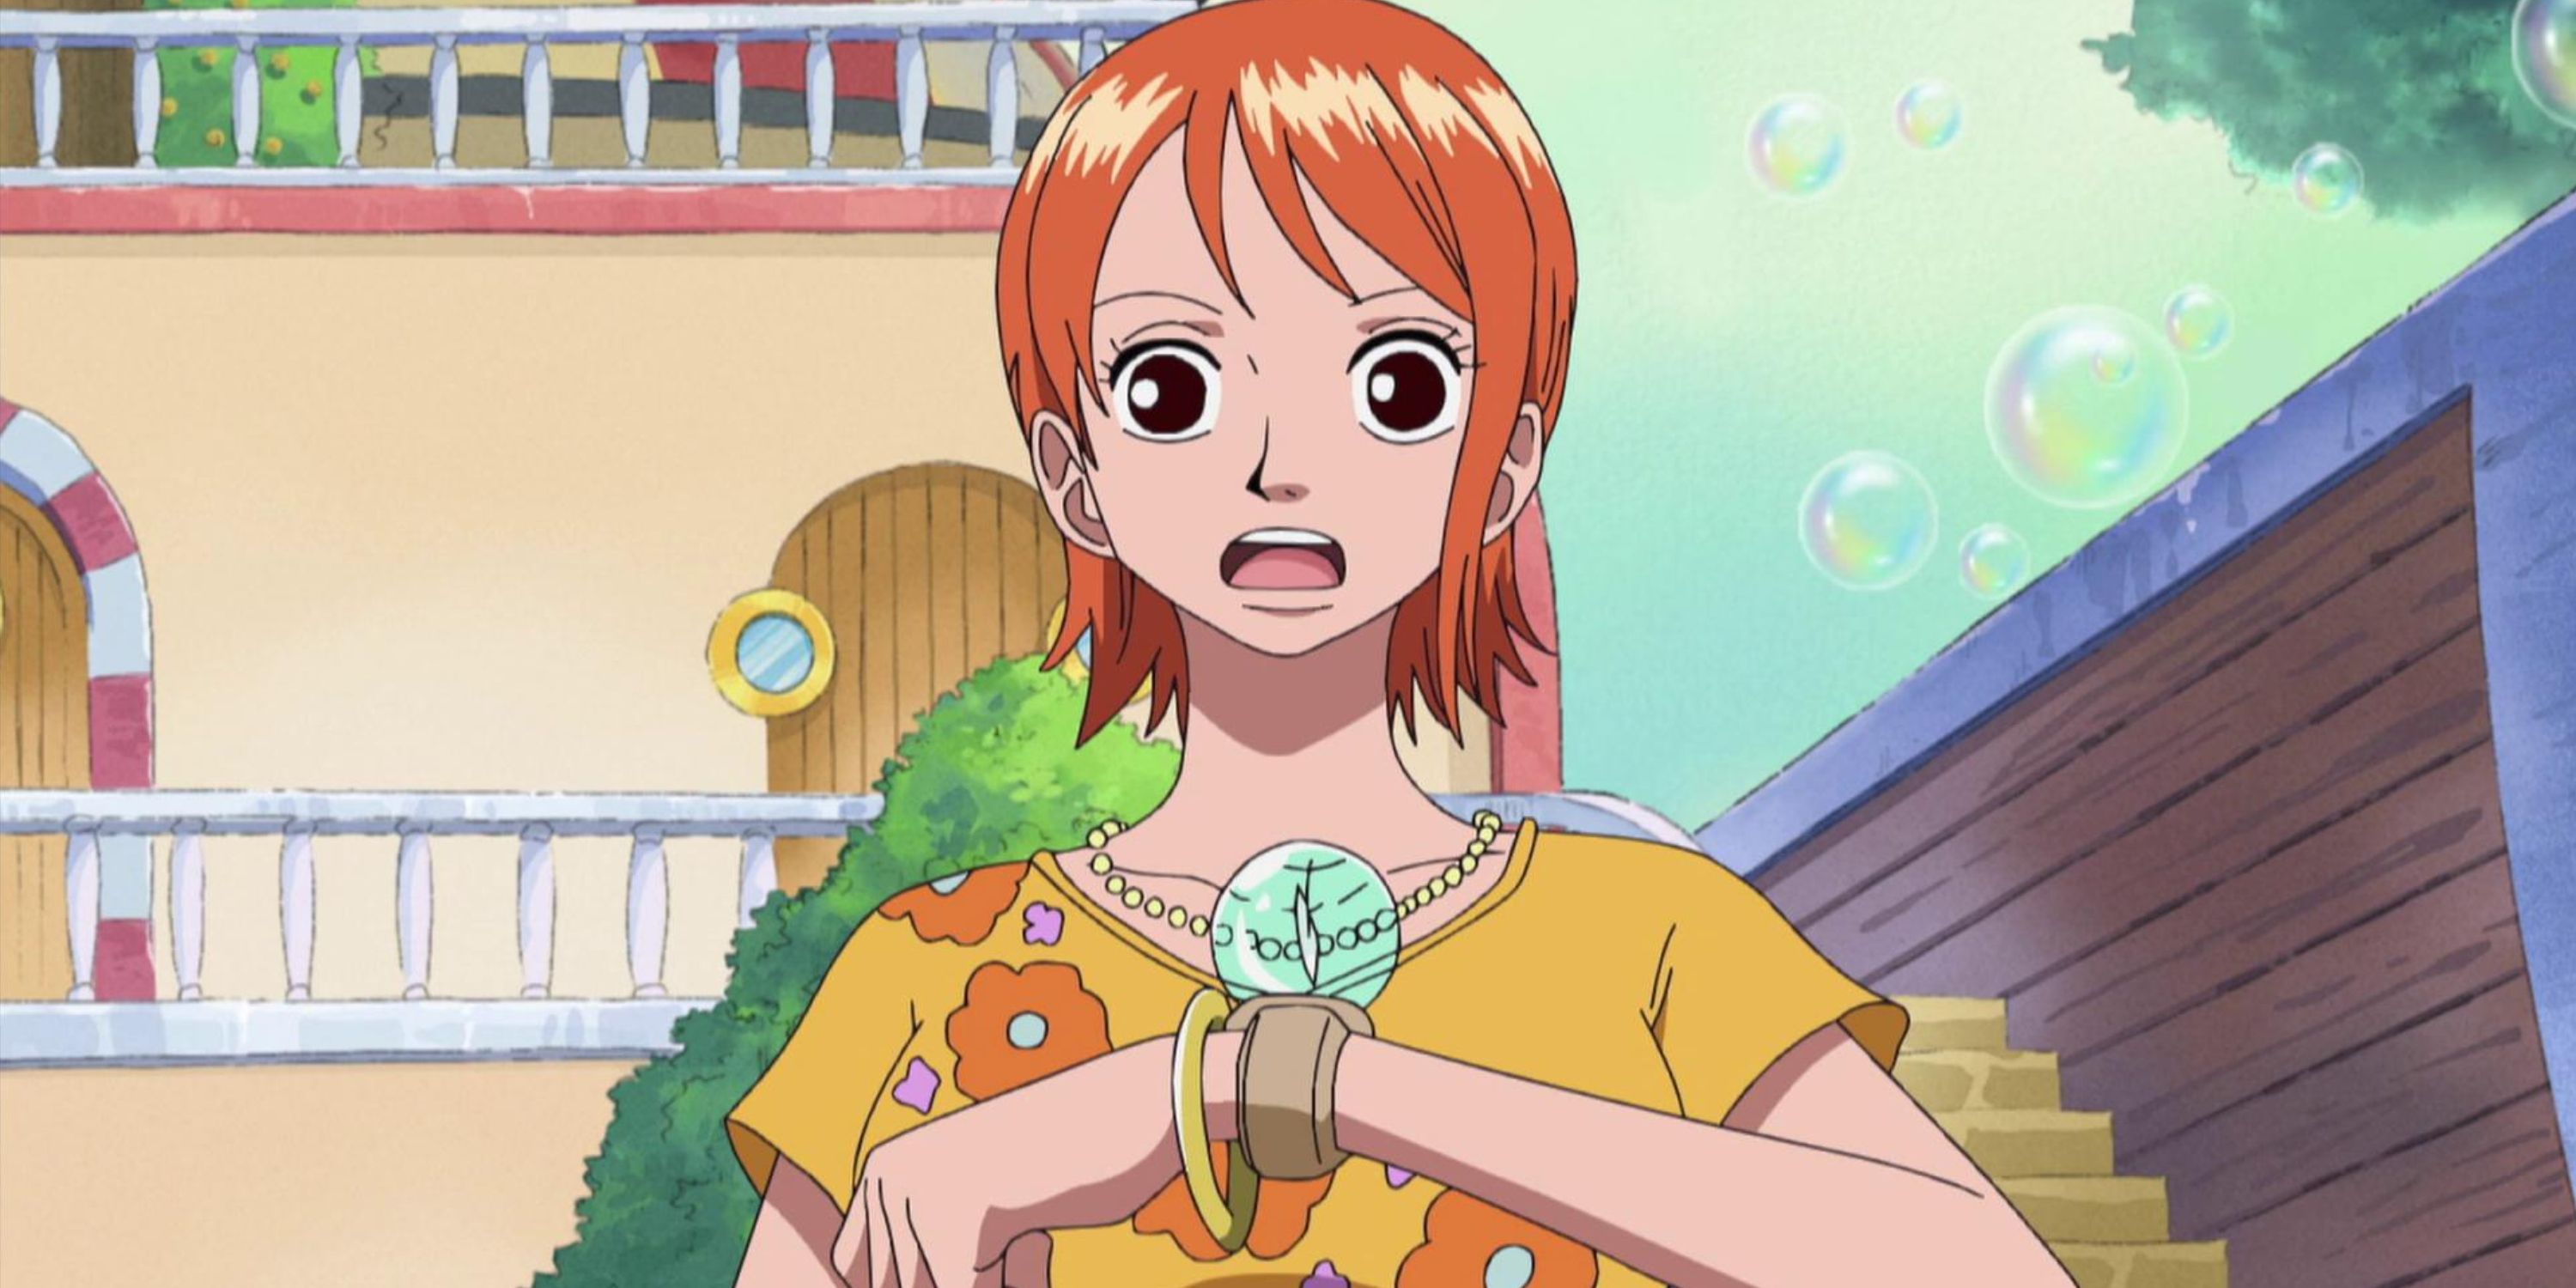 Nami consults her Log Pose during One Piece's Sabaody arc.